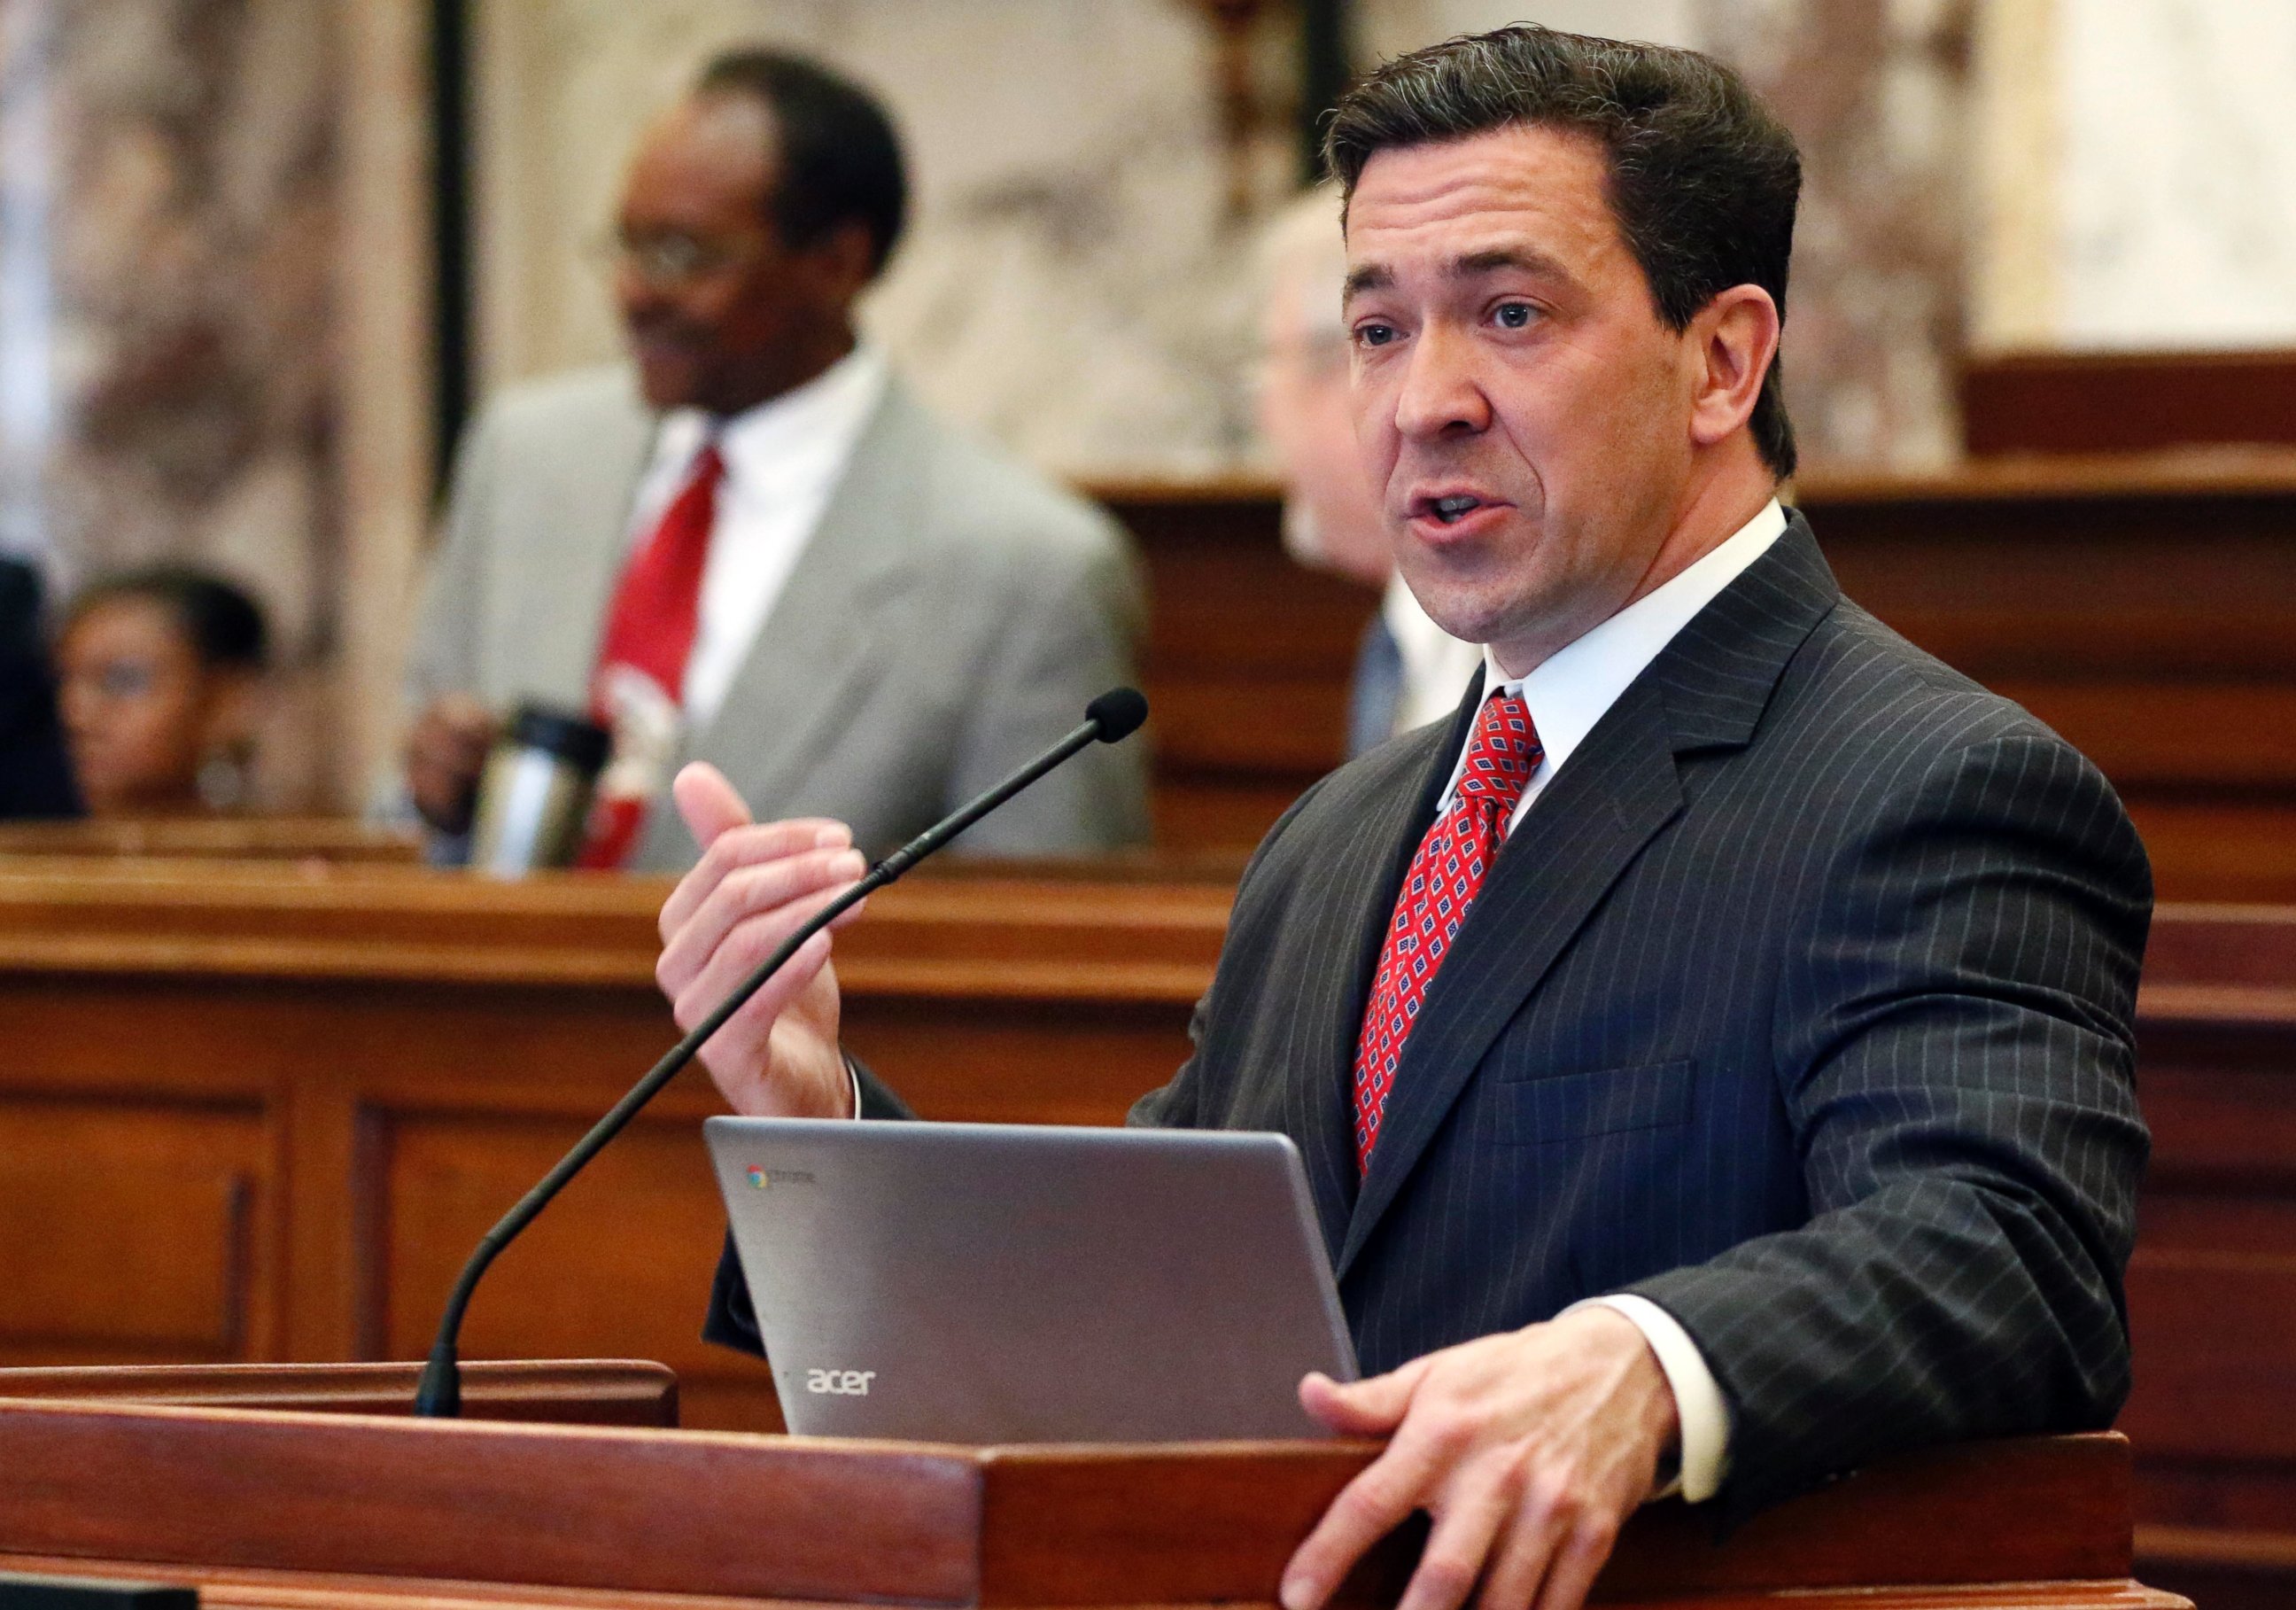 In this Tuesday, March 7, 2017, file photo, state Sen. Chris McDaniel, R-Ellisville, speaks during a floor debate in Jackson, Miss. McDaniel is hinting strongly that he will challenge U.S. Sen. Roger Wicker in the 2018 U.S. Senate race.